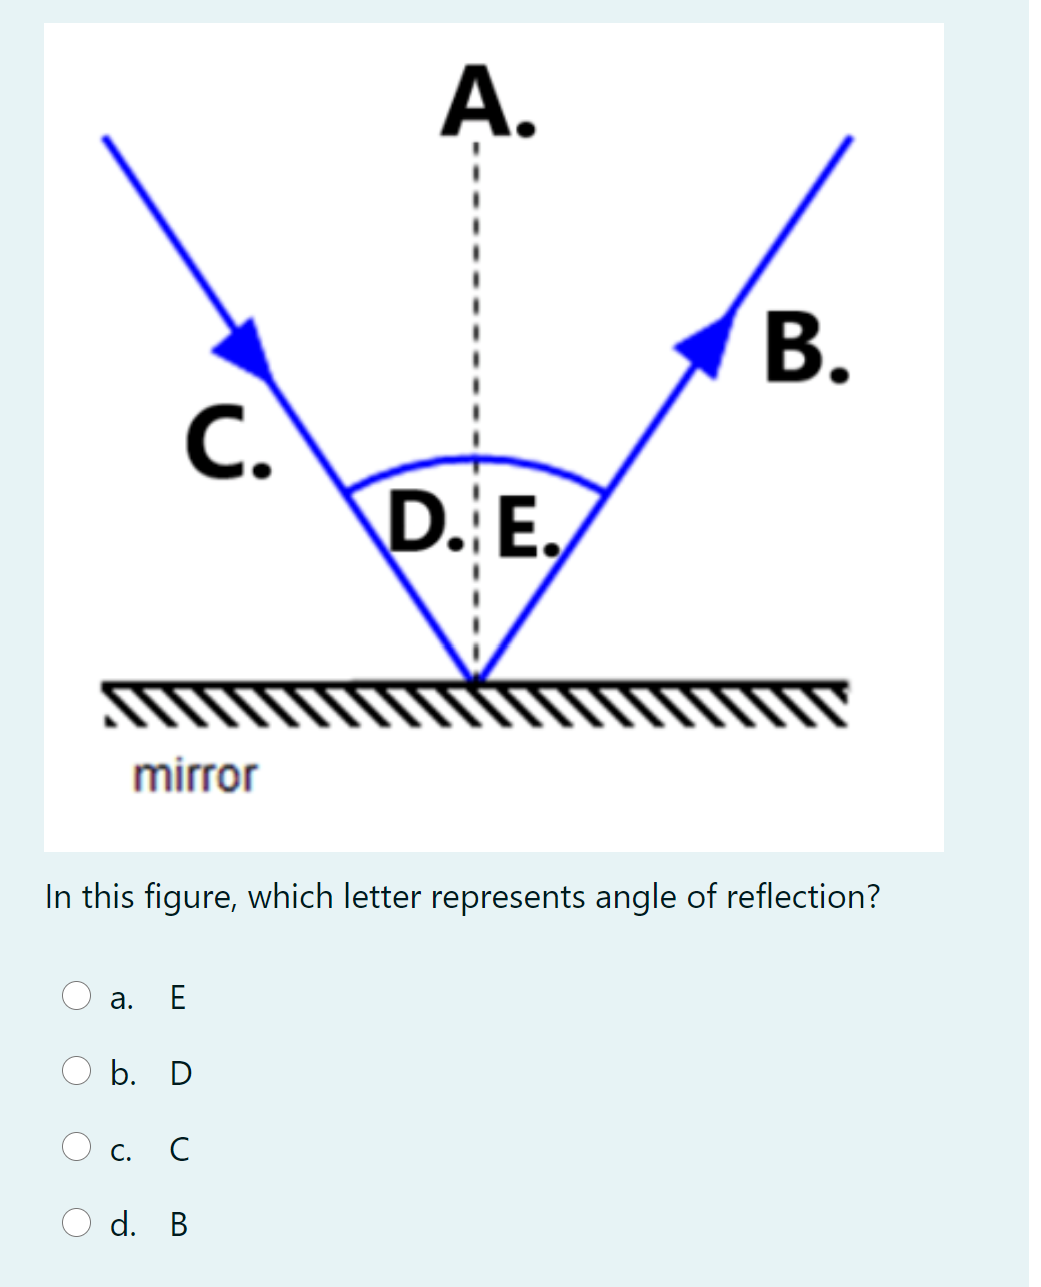 А.
В.
D. E.
mirror
In this figure, which letter represents angle of reflection?
а.
E
b. D
С. С
d. B
C.
